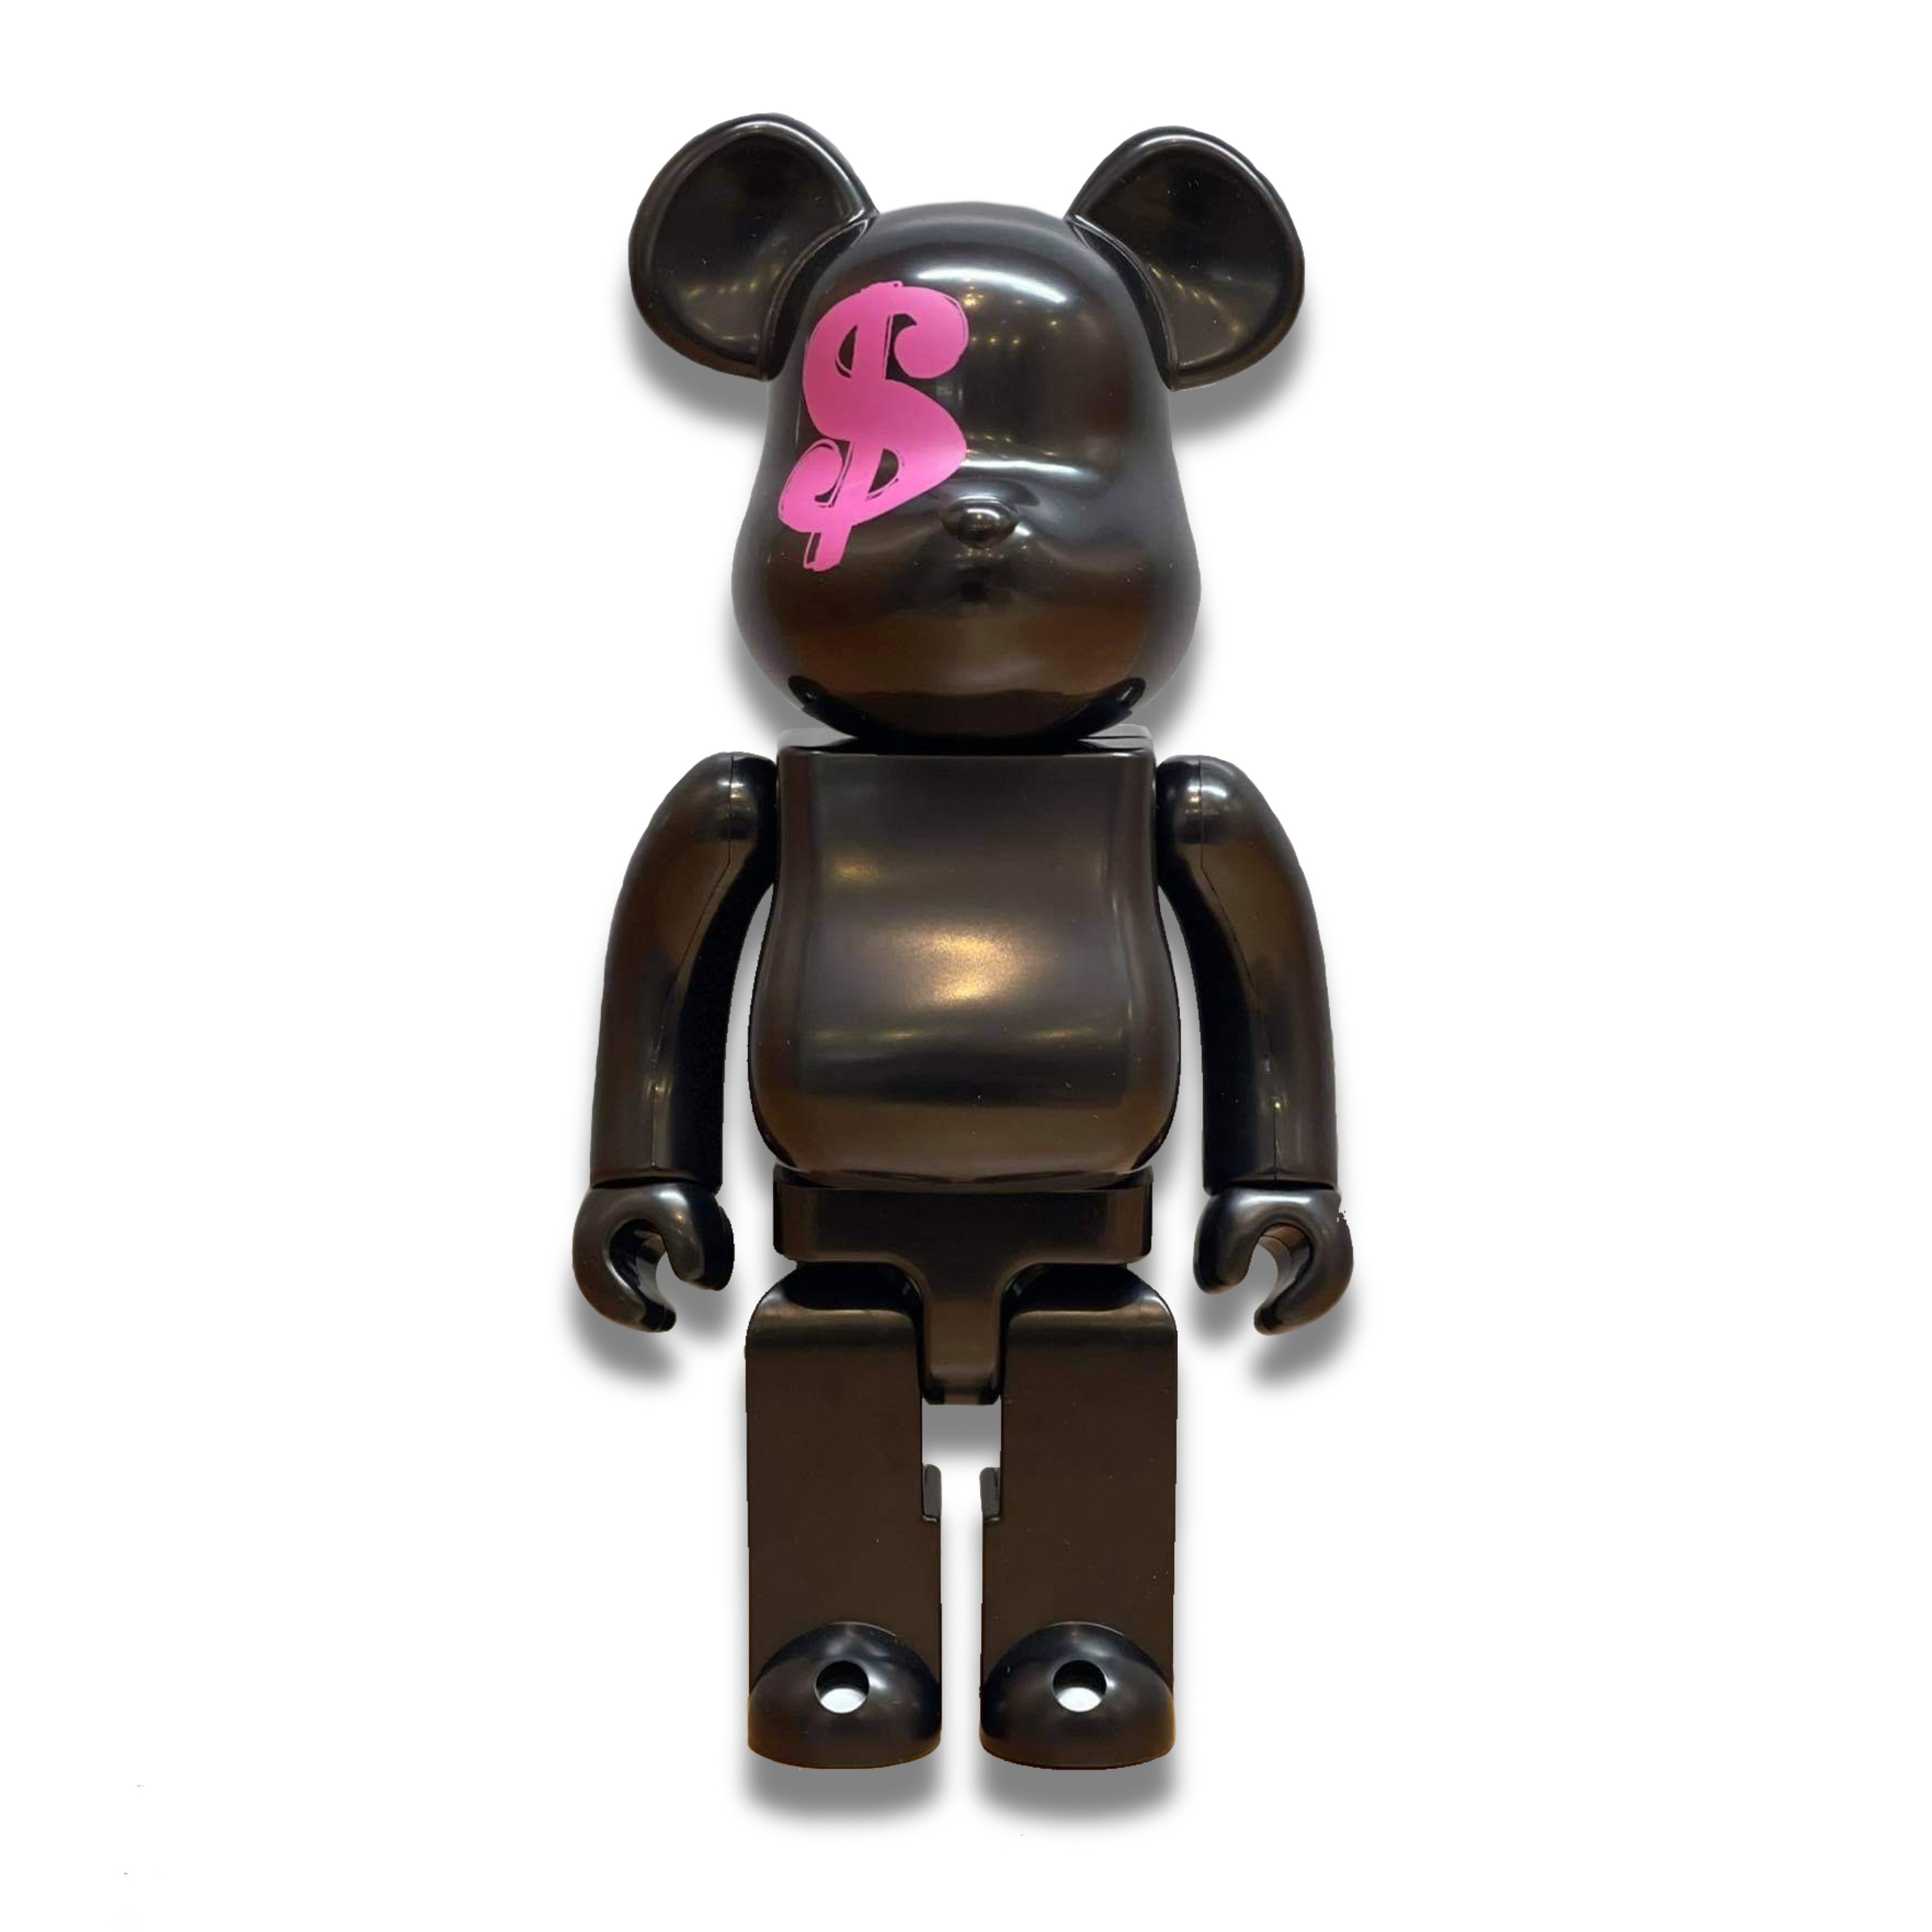 Bearbrick Andy Warhol by Hysteric Glamour 400%